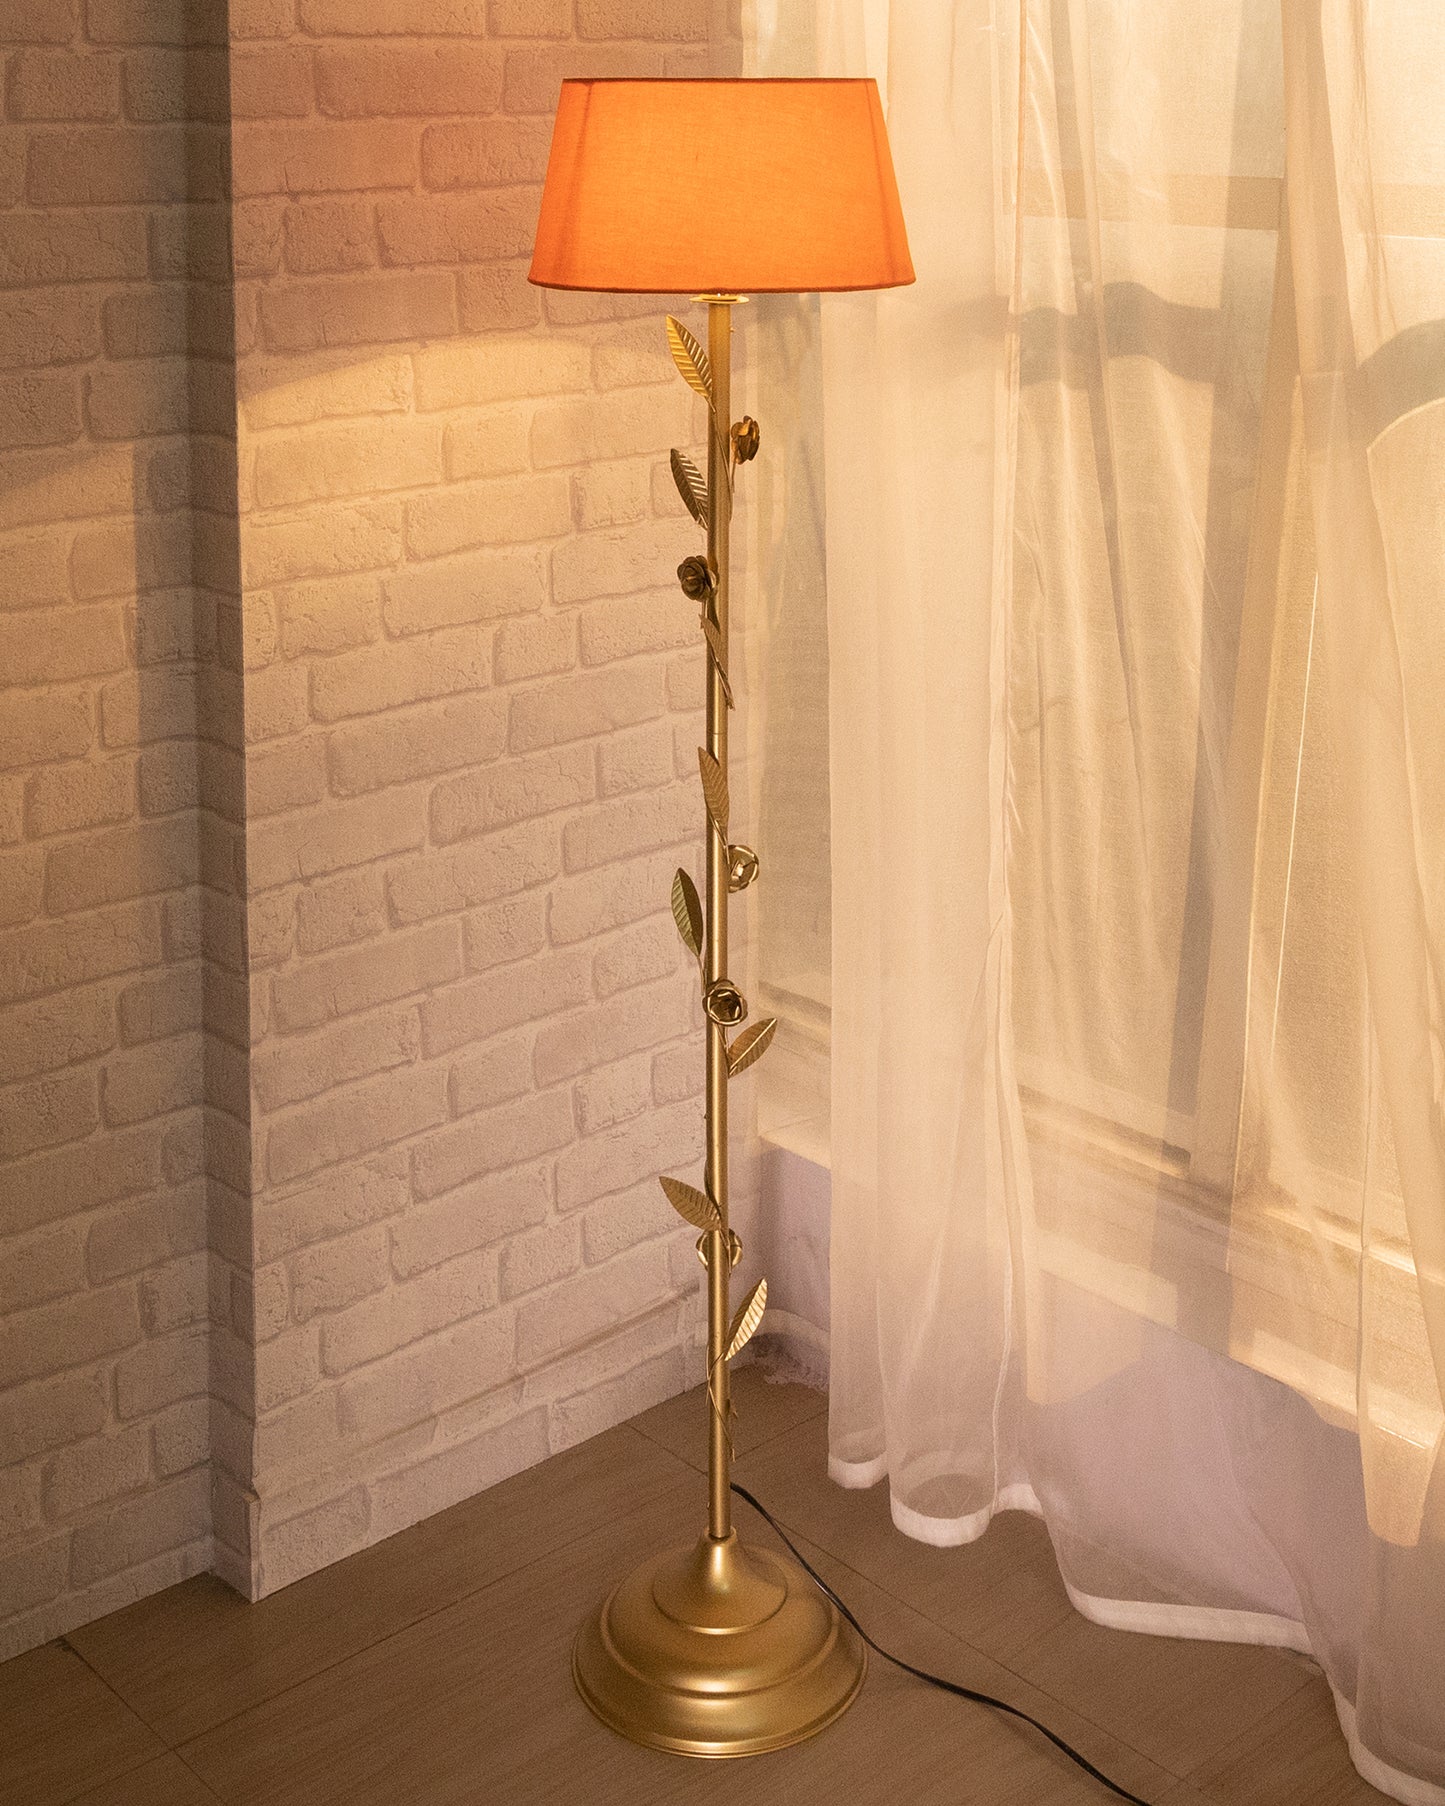 Contemporary Metal Floor Lamp,Contemporary Minimalist Standing Floor Light with Iron Legs, E27 Lamp Base, Modern Design Standing Light for Living Room,Bedroom,Antique Gold